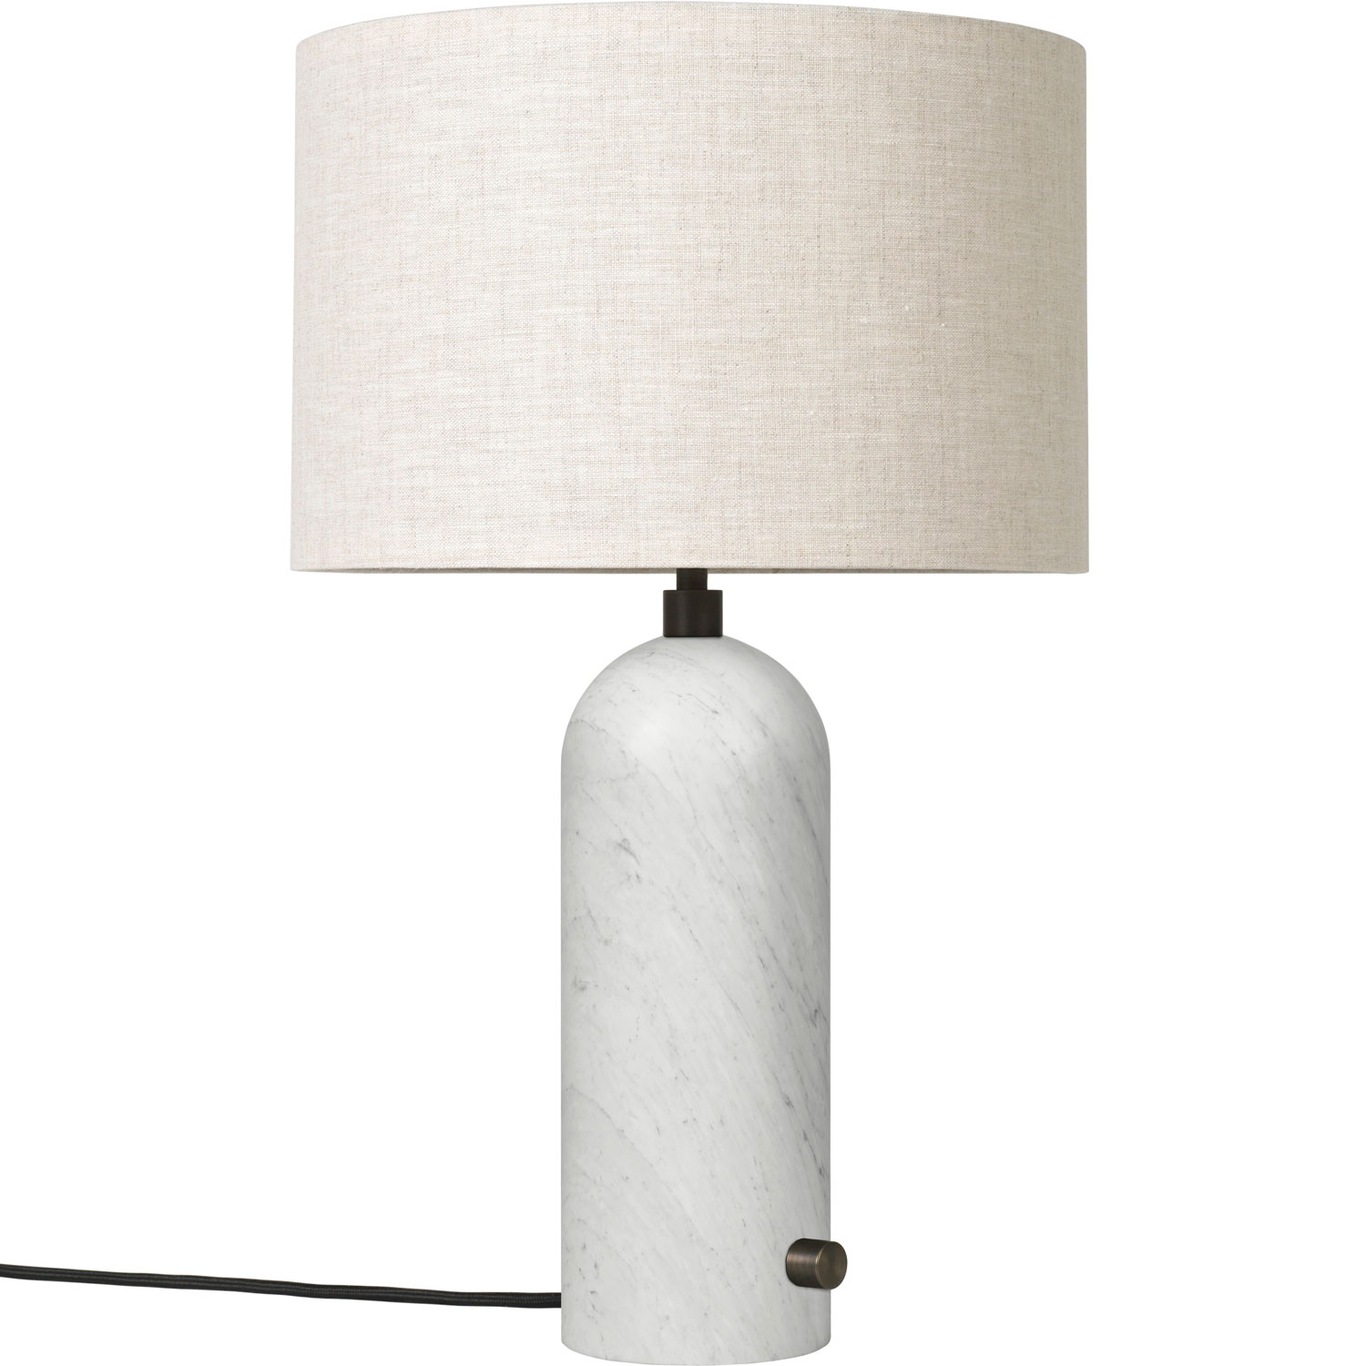 Gravity Table Lamp Small, White Marble / Canvas